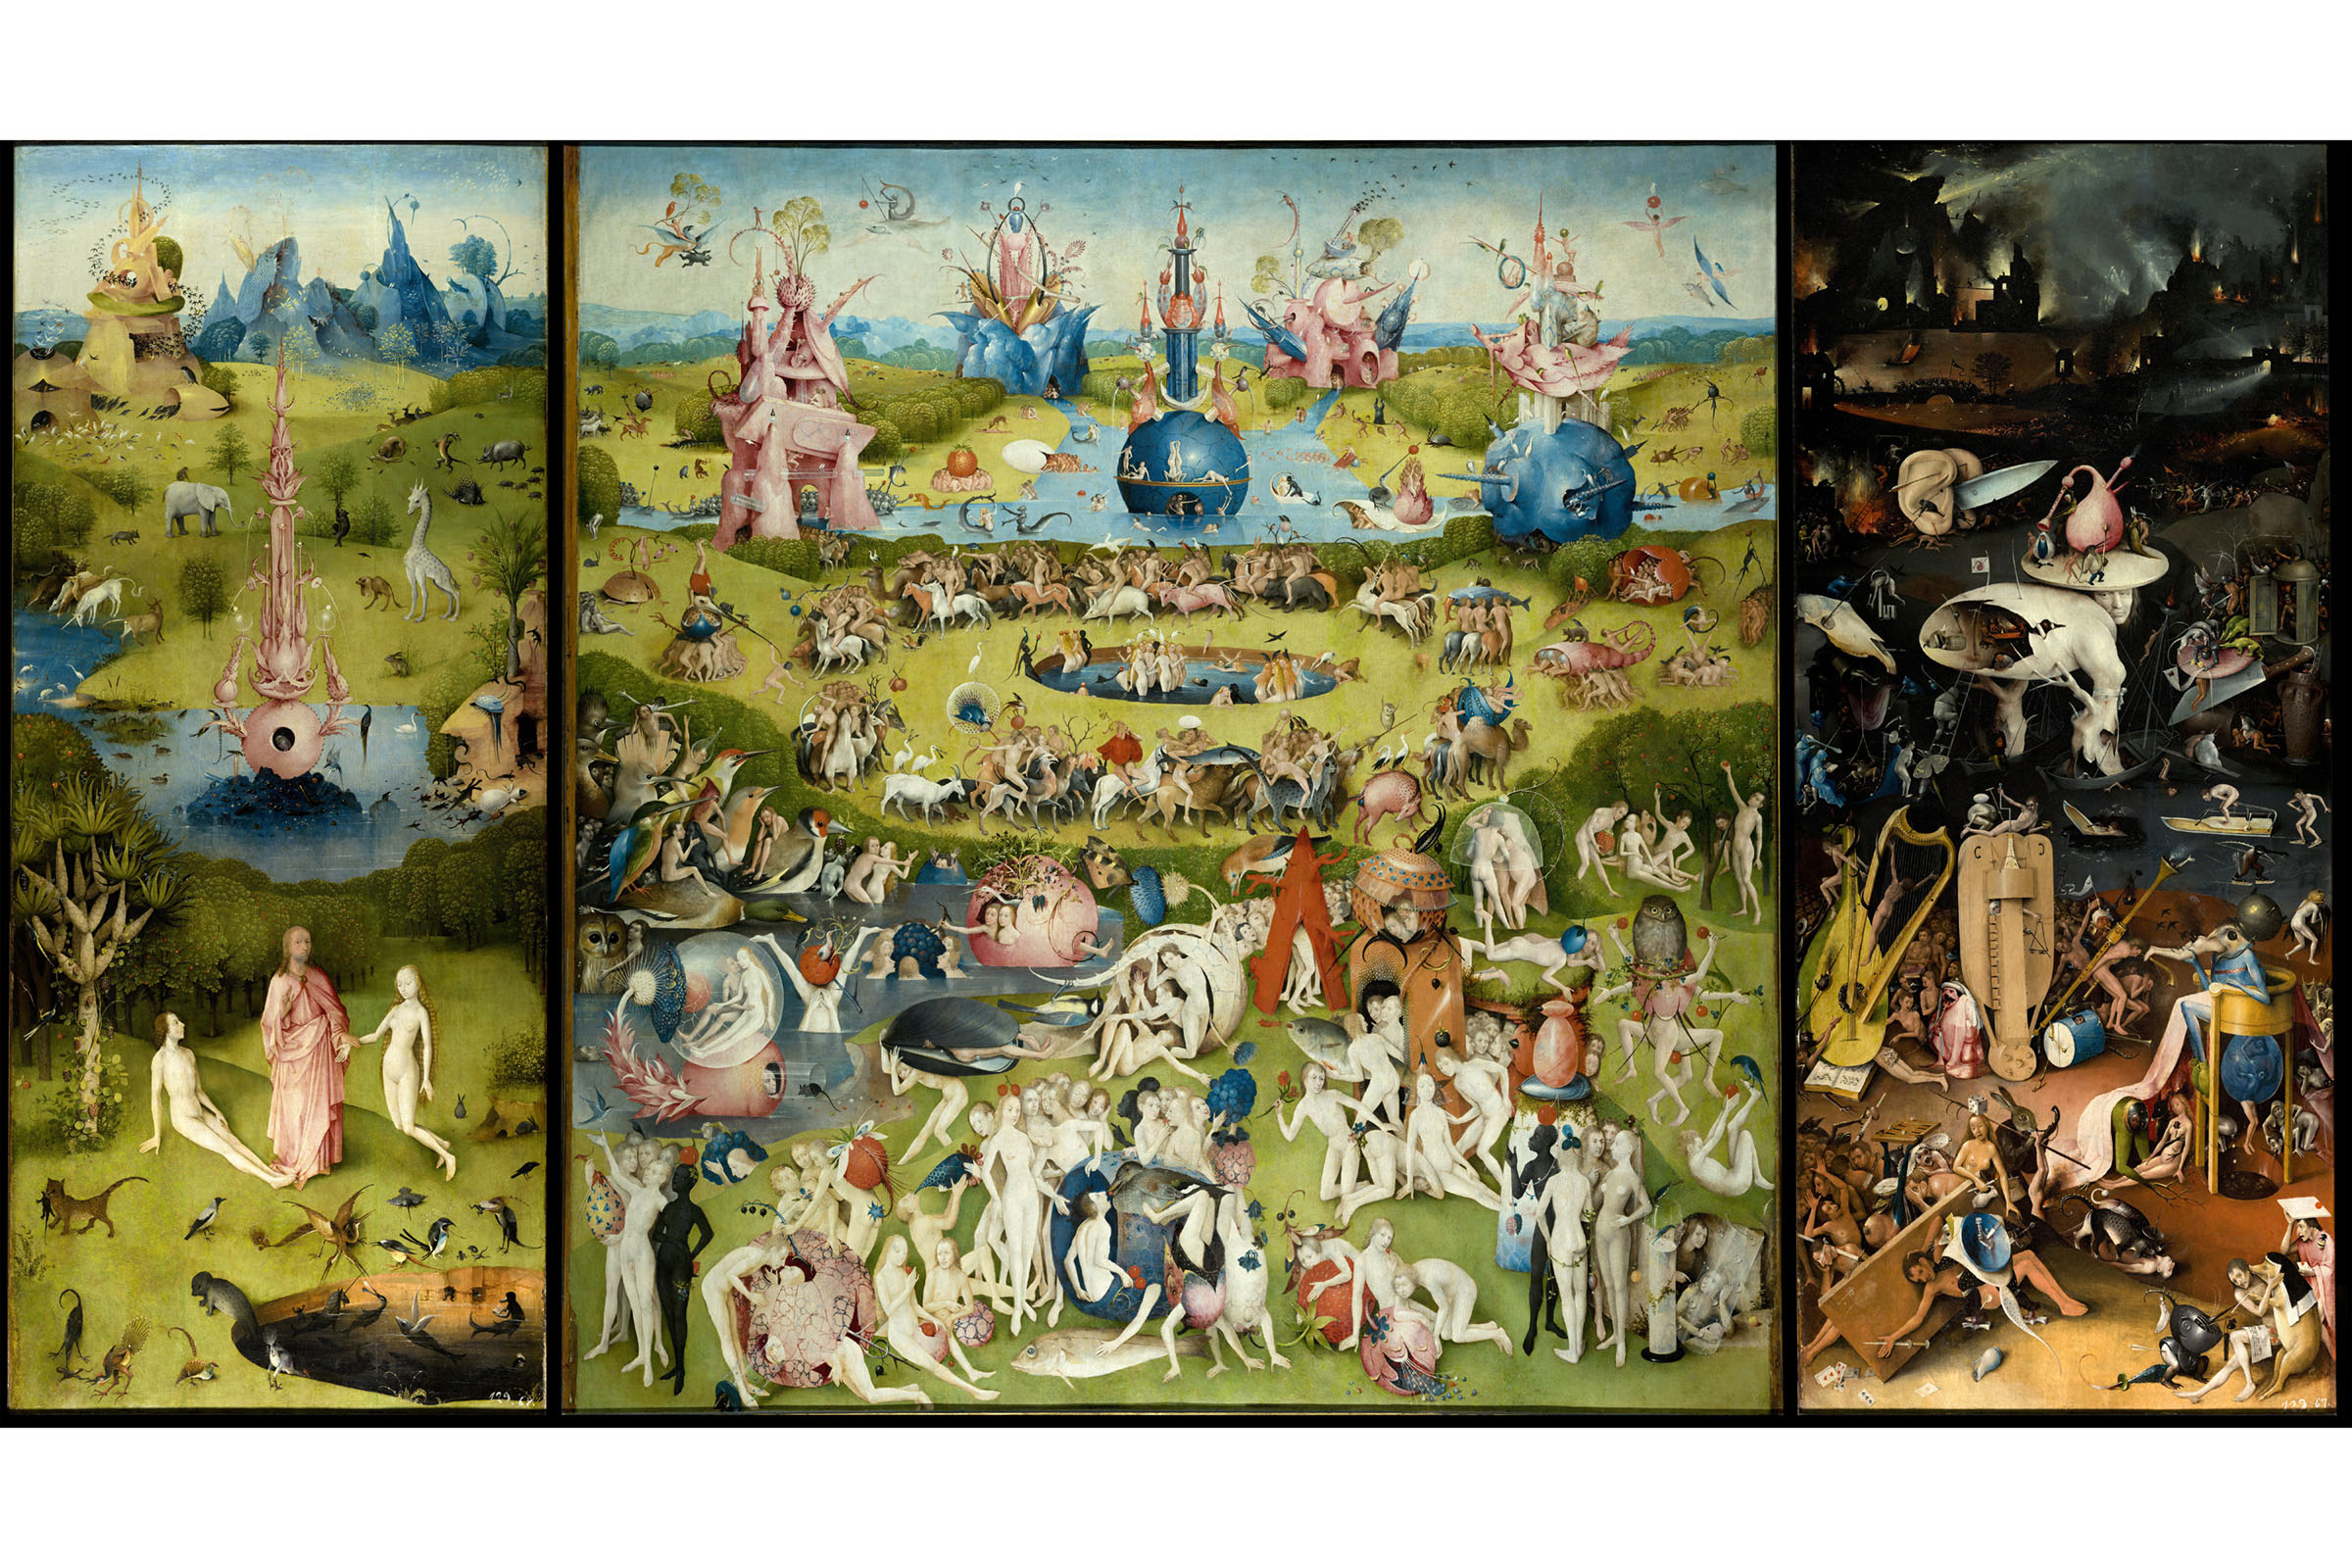 Garden Of Earthly Delights By Hieronymus Bosch 1515 Ebay